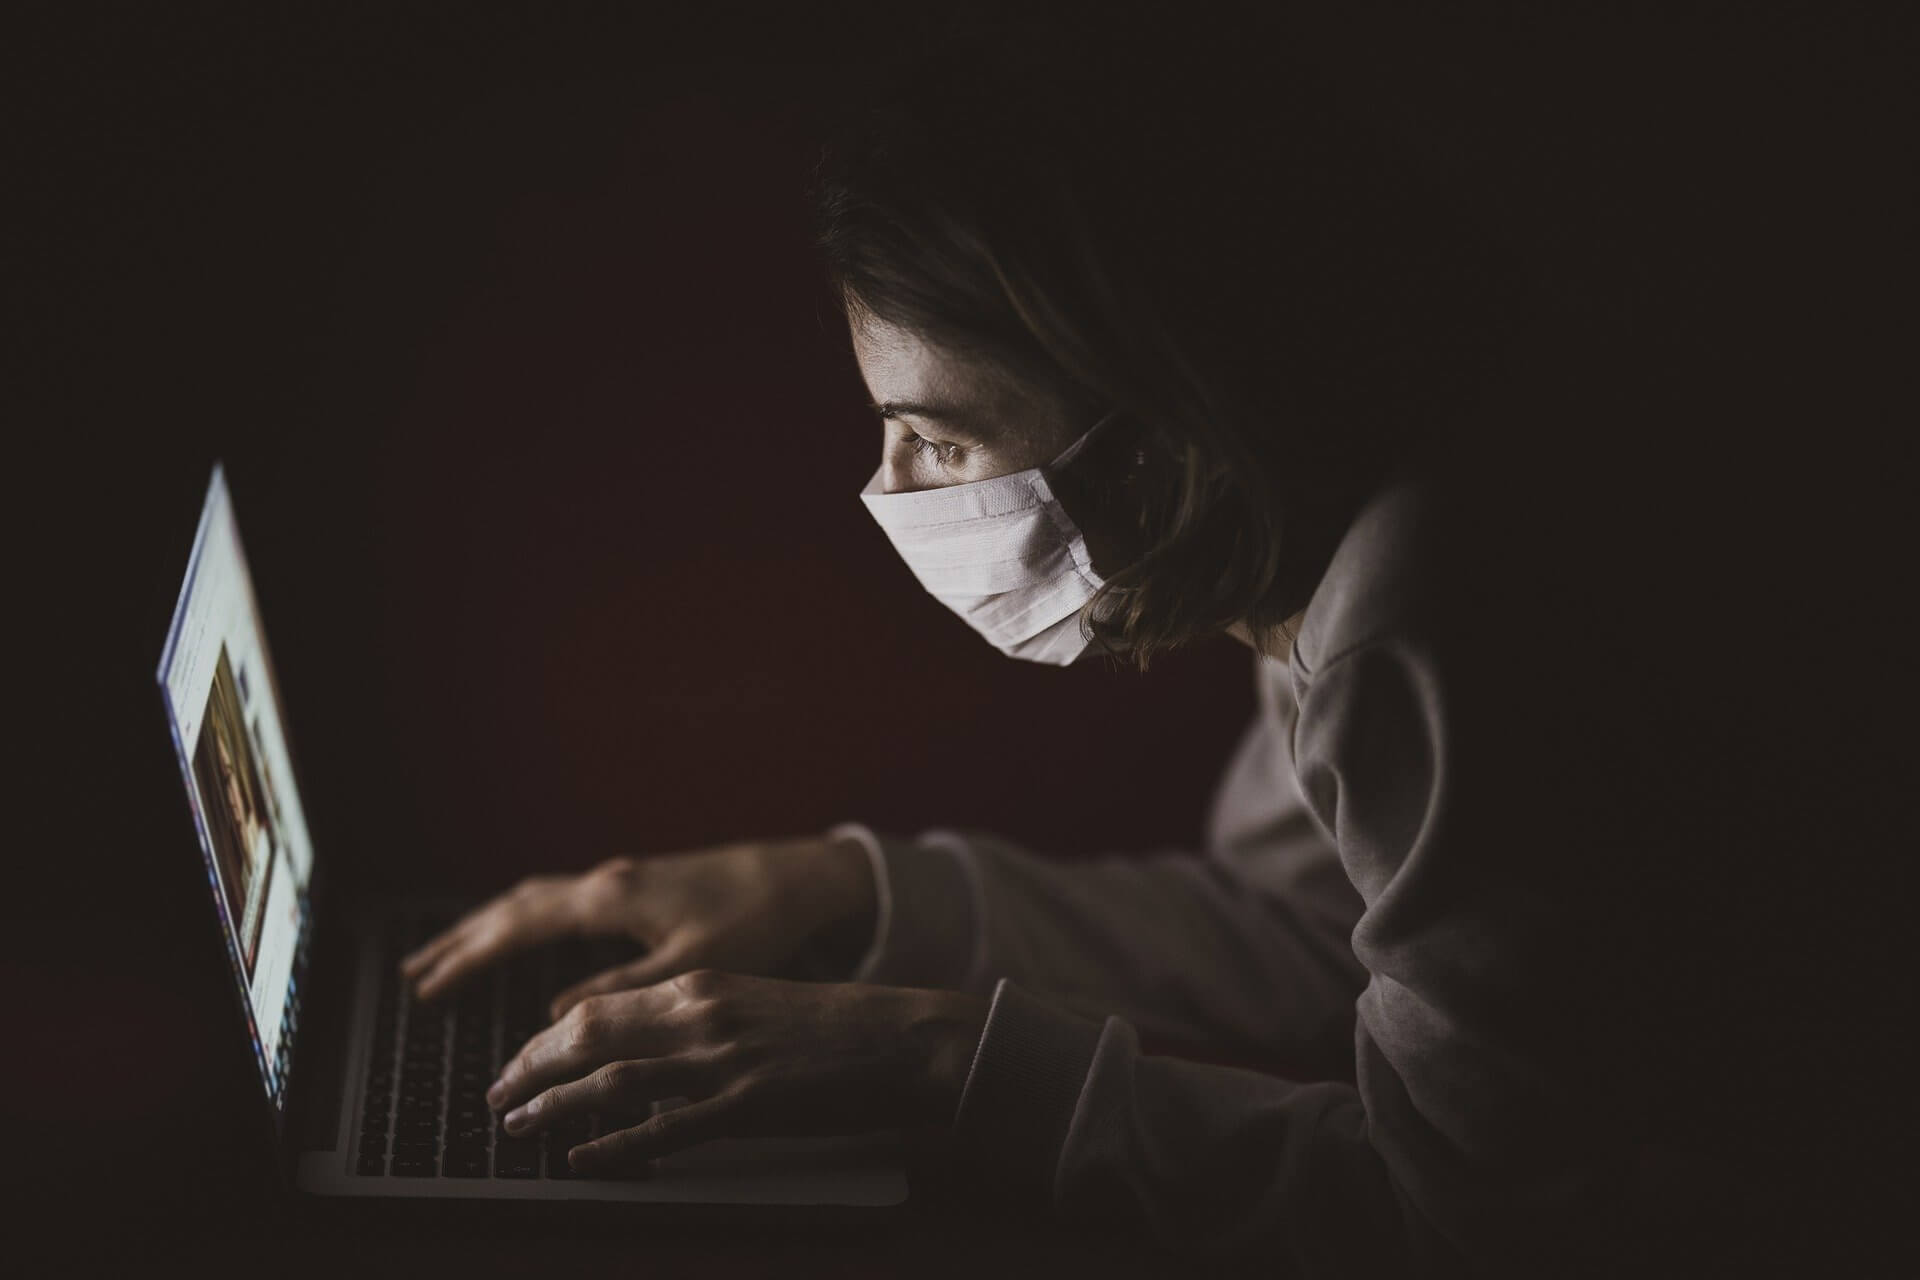 person typing on a laptop while sitting in the dark wearing a surgical mask like those worn during COVID-19 pandemic